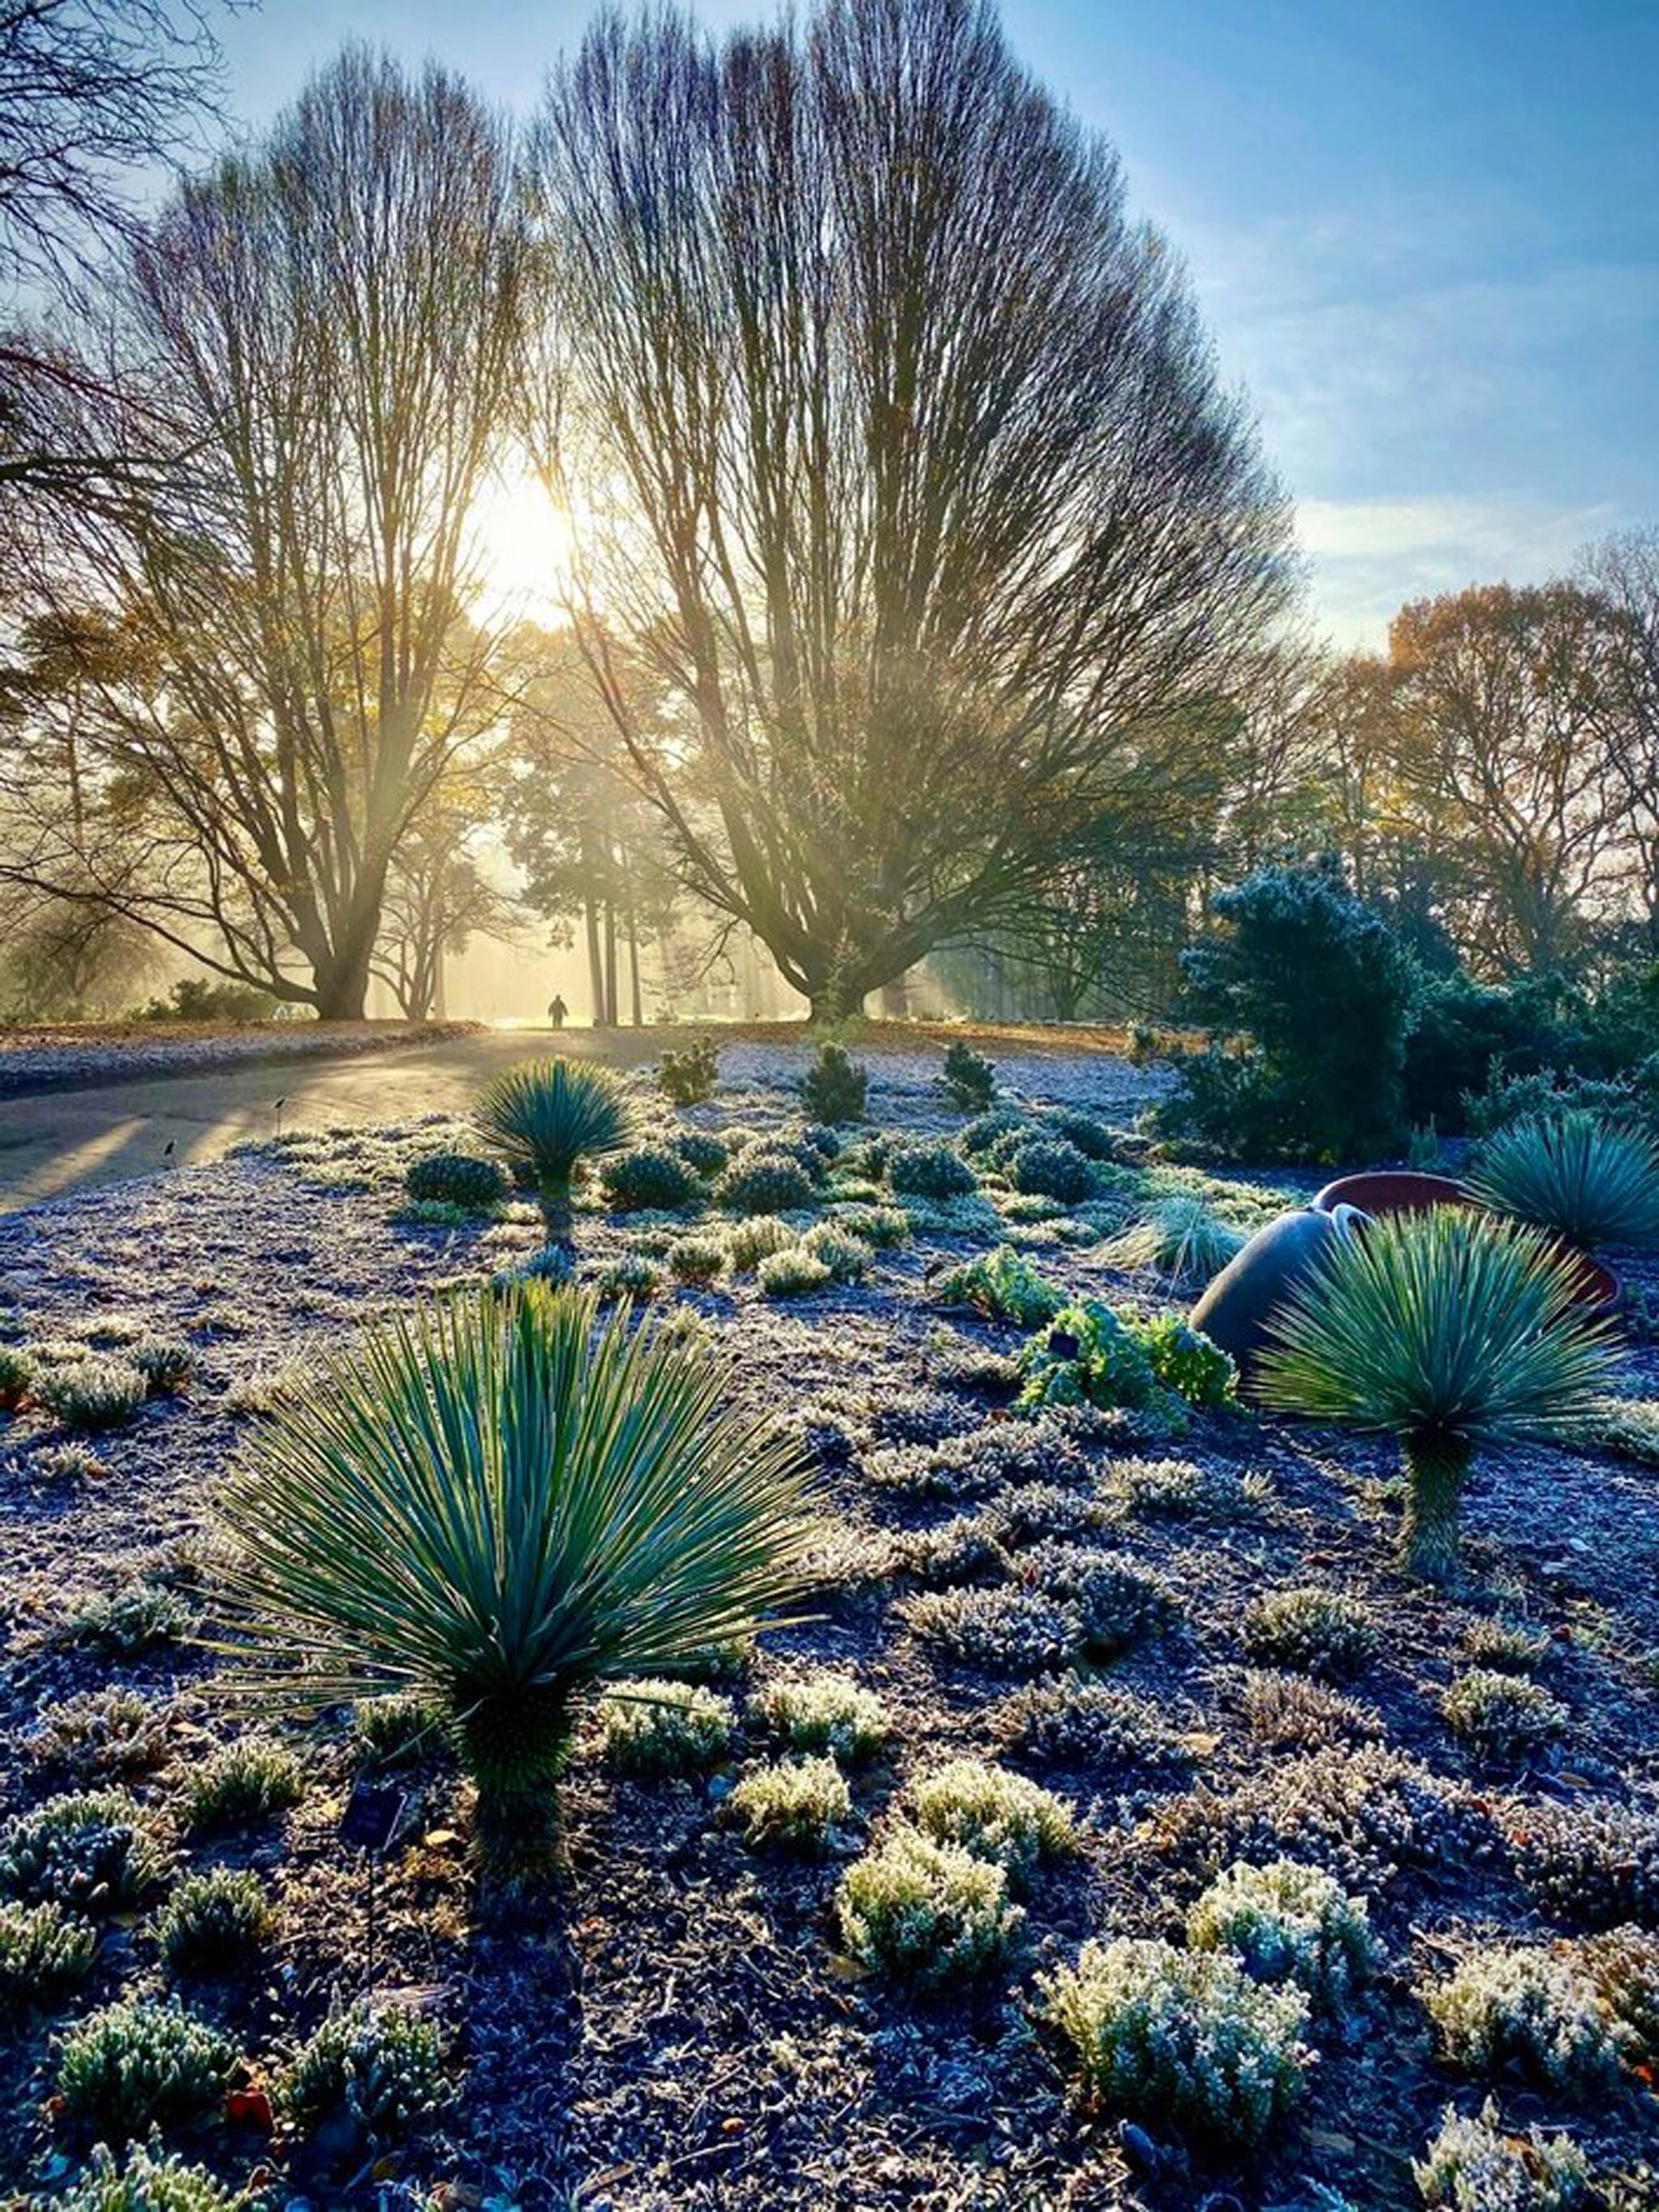 One of the winning shots of the RHS Photographic Competition 2020, A winter’s day at Wisley (Richard Turner/PA)